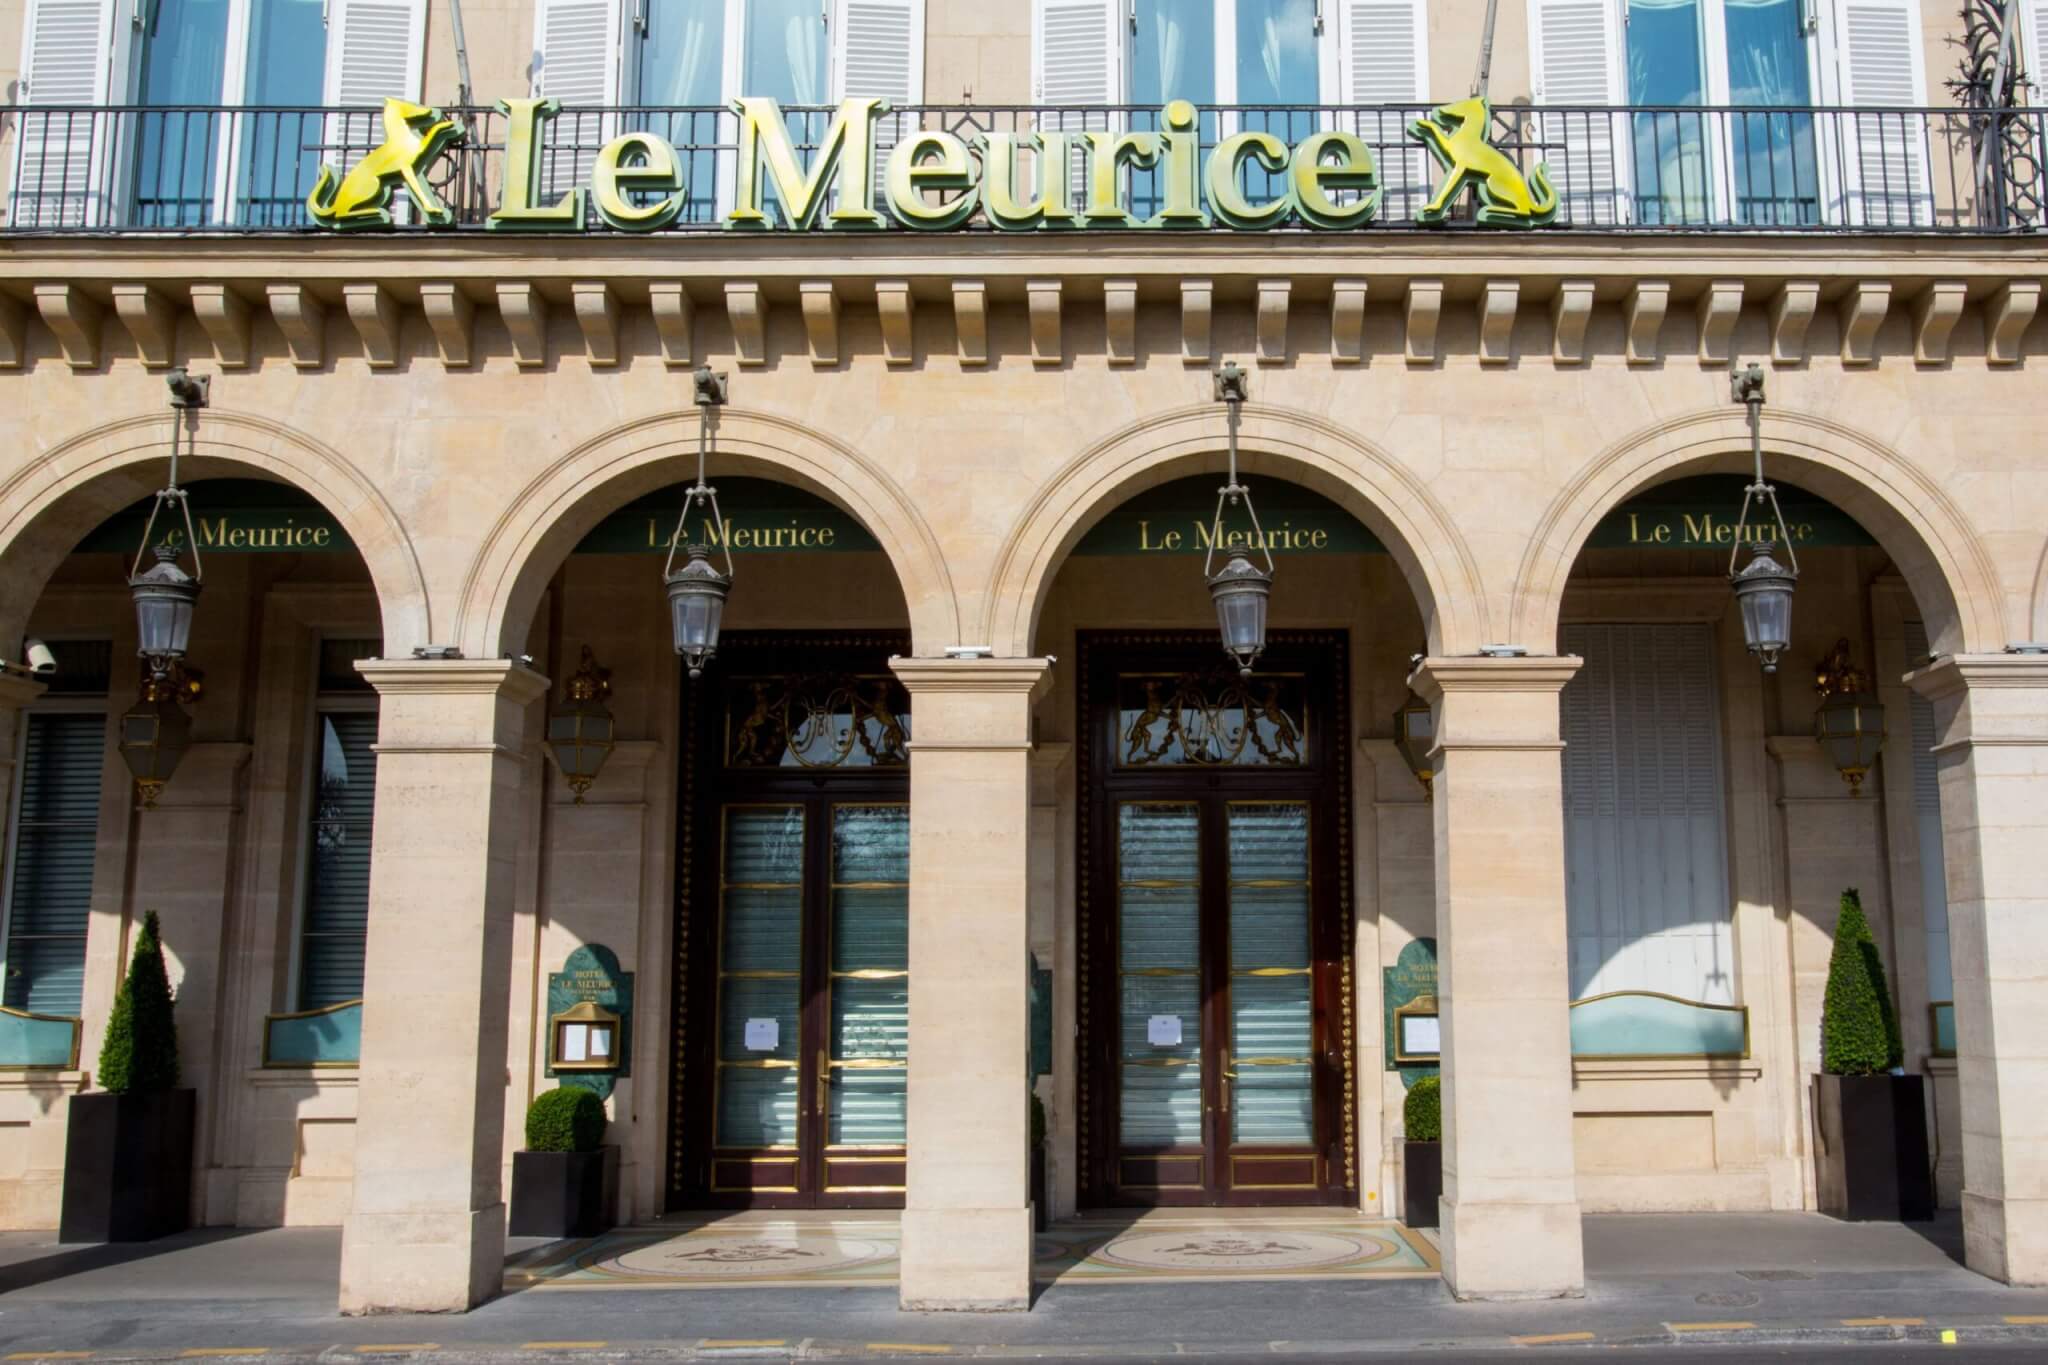 Coronavirus - Covid 19 - Le Meurice Hotel closed after Government measure Confinement. Confinement is necessary for the protection of the public on March 19, 2020 in Paris, France.